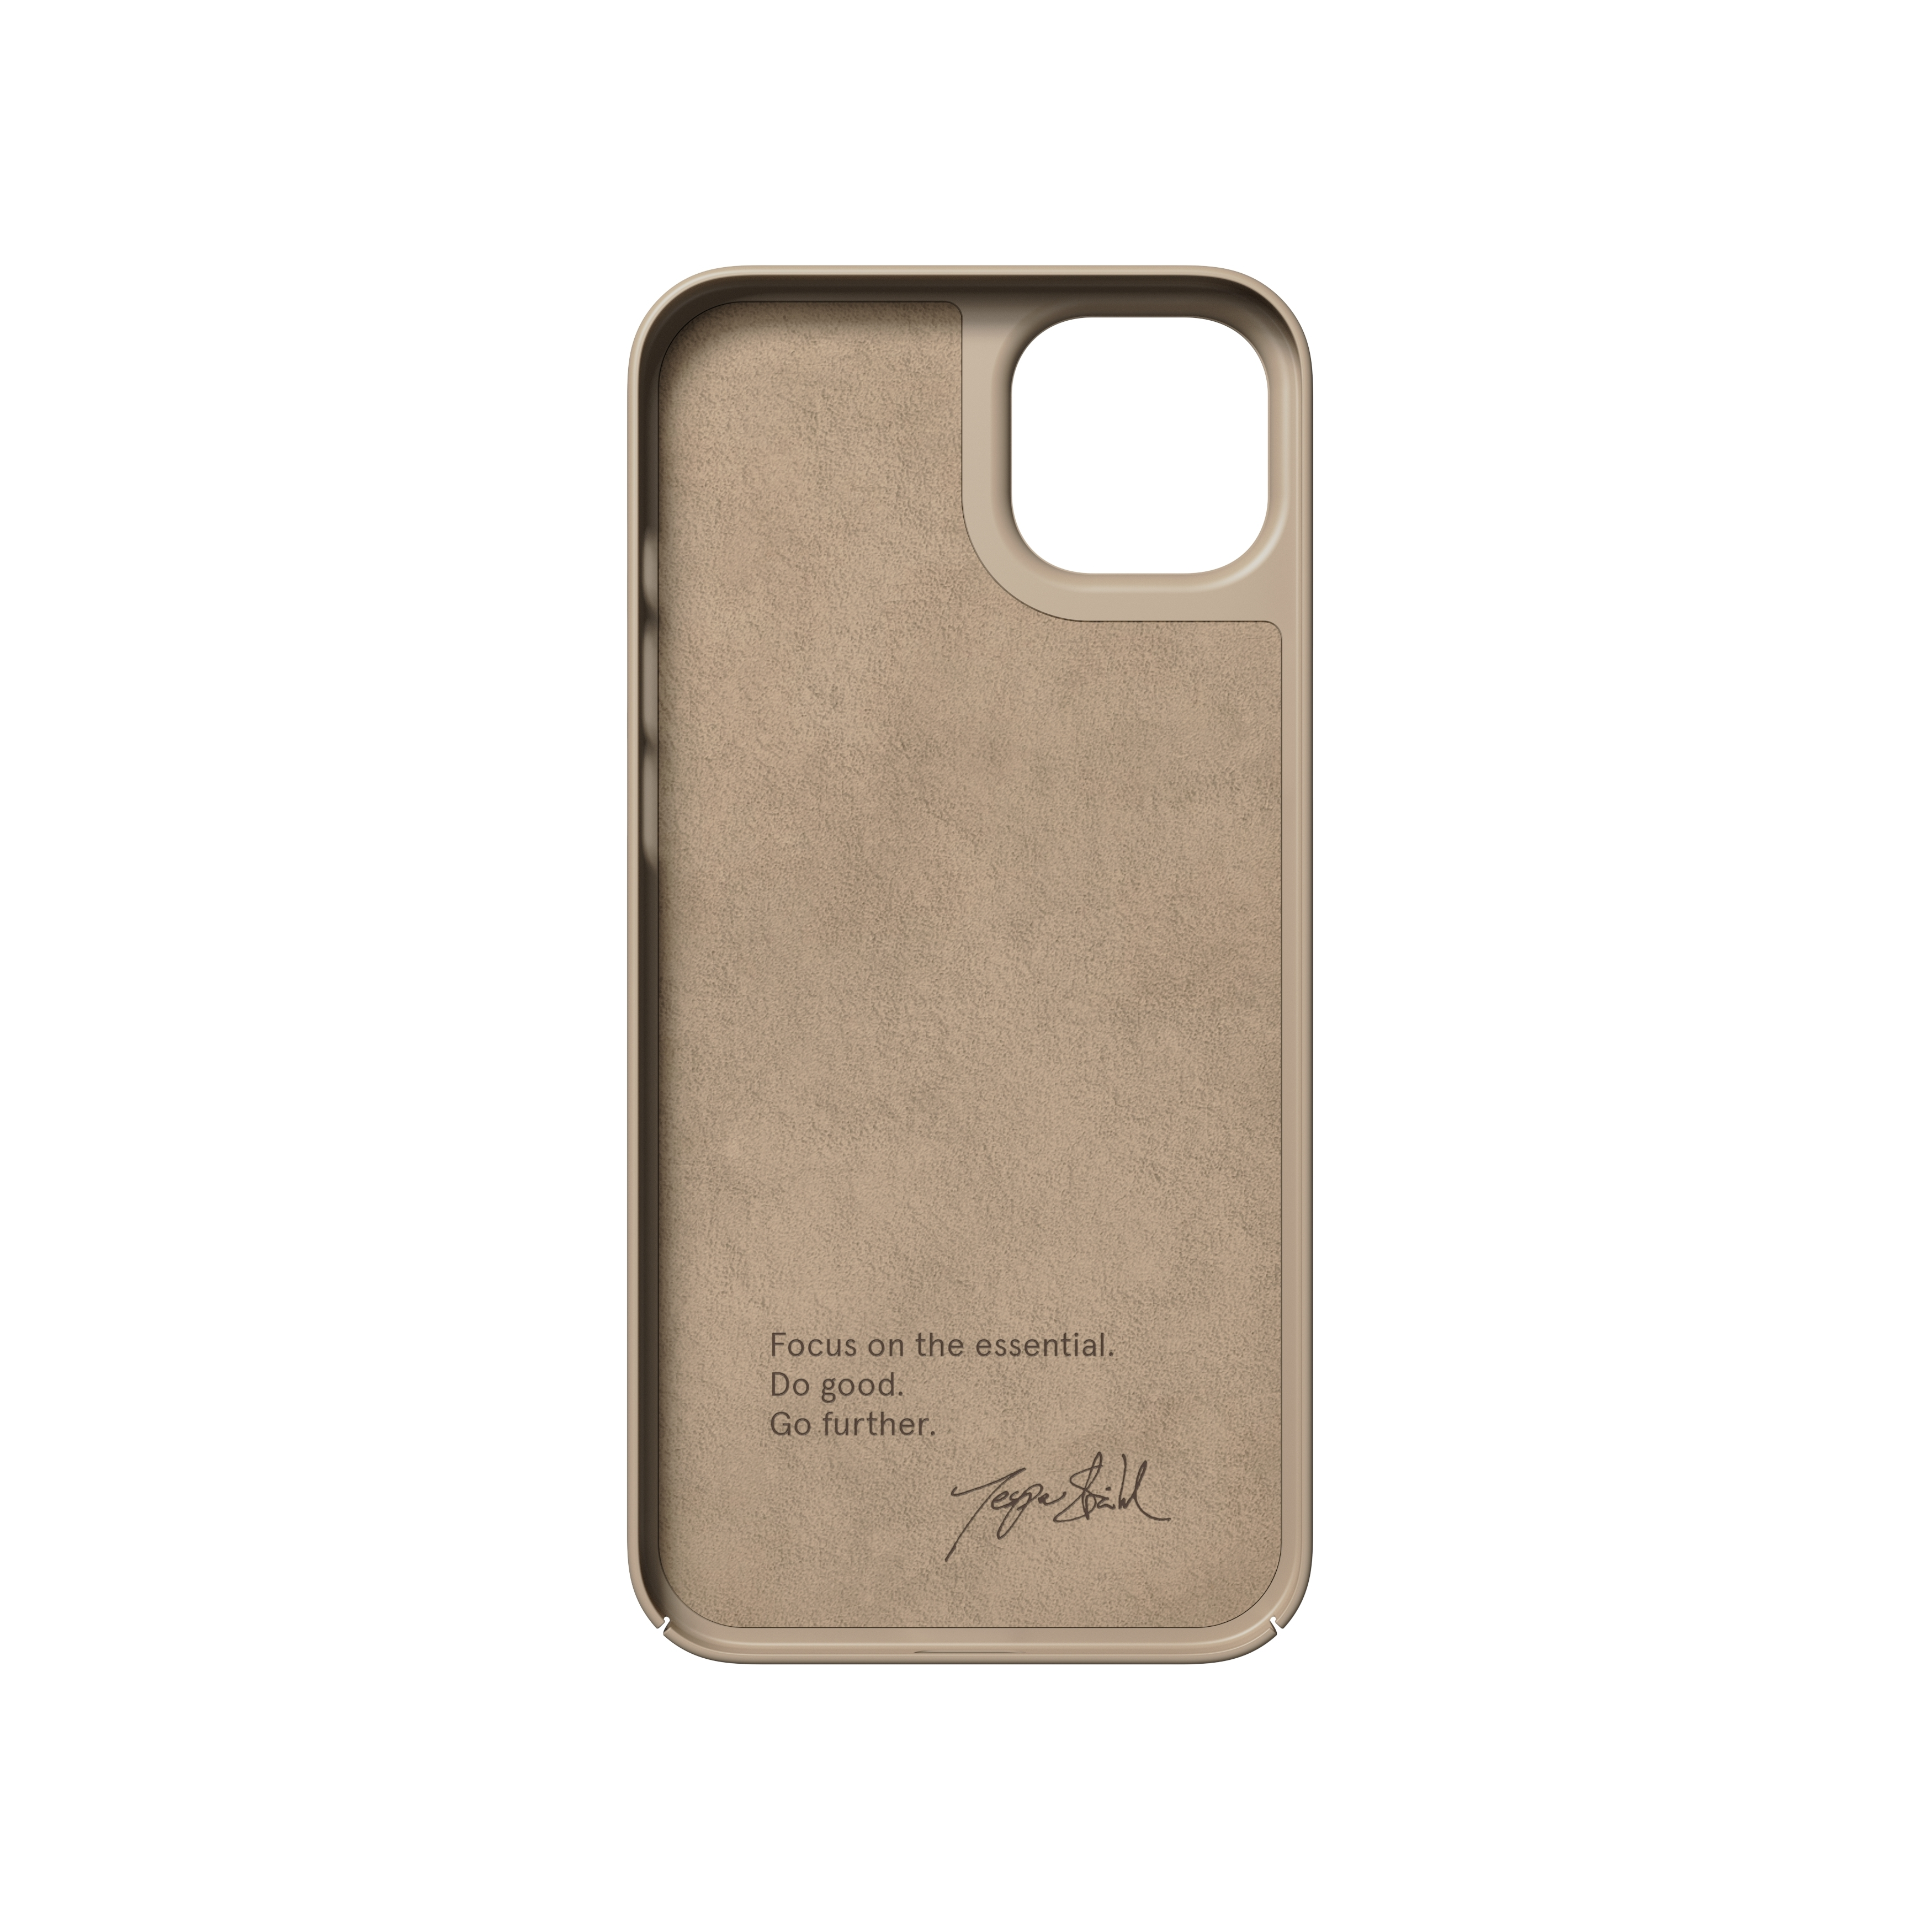 PLUS, SAND NUDIENT 14 APPLE, IPHONE Thin, Backcover,